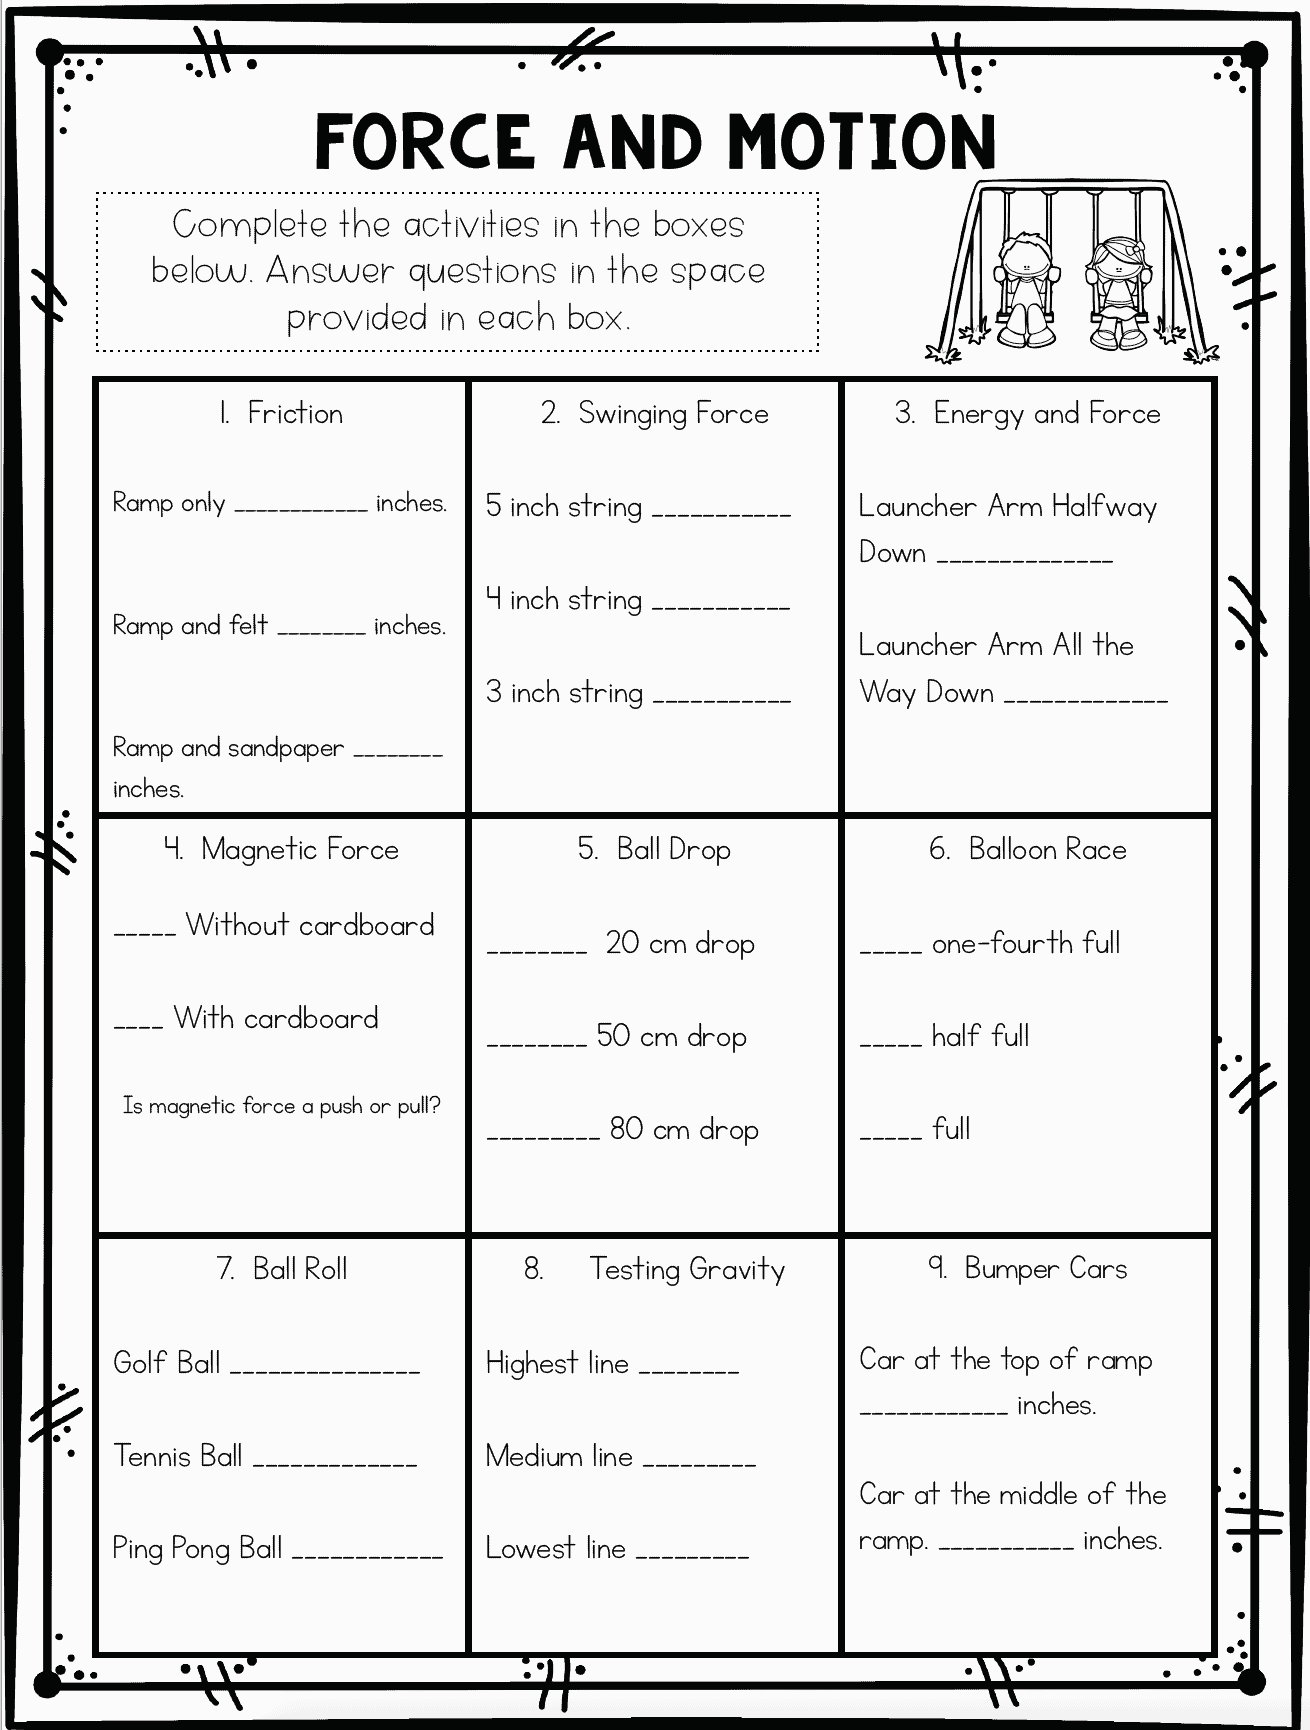 forces-and-motion-worksheet